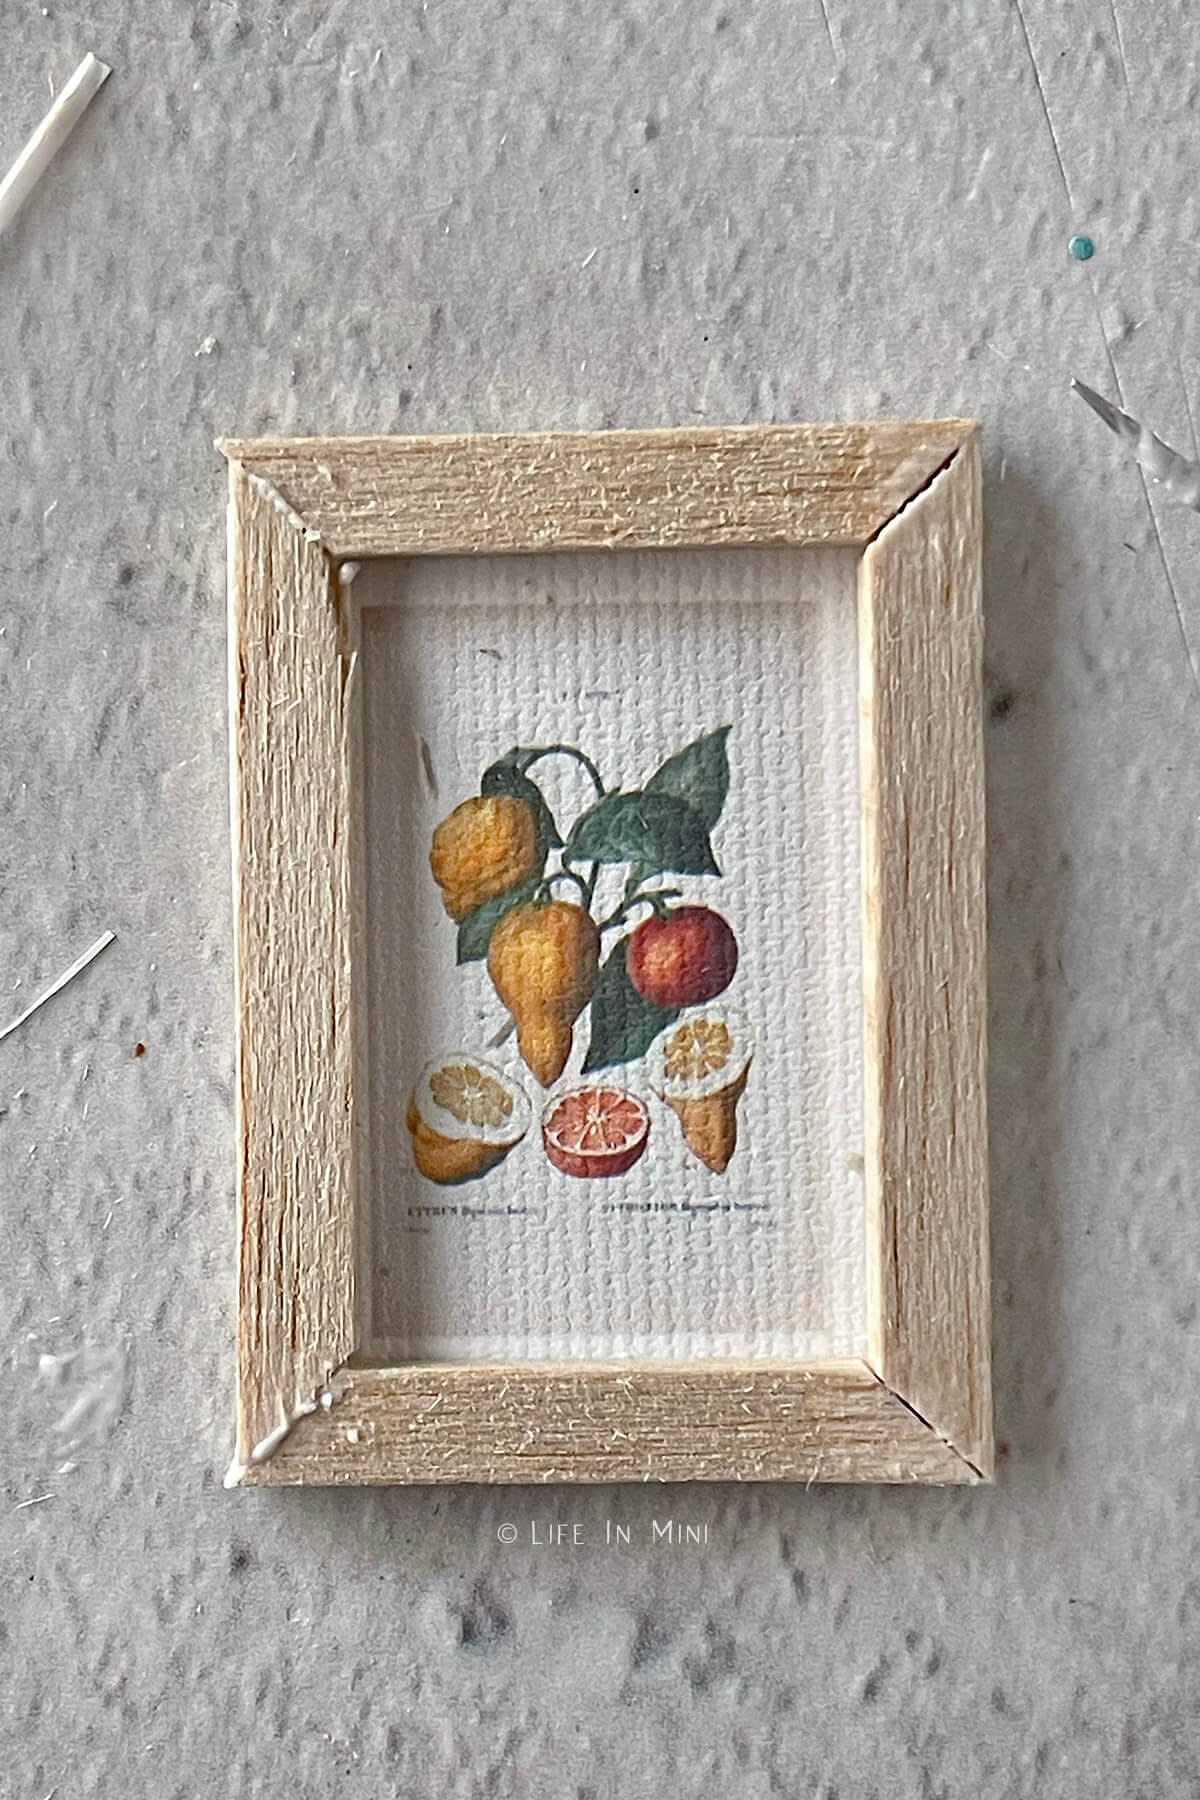 Closeup of a miniature citrus print with popsicle stick frame glued around it